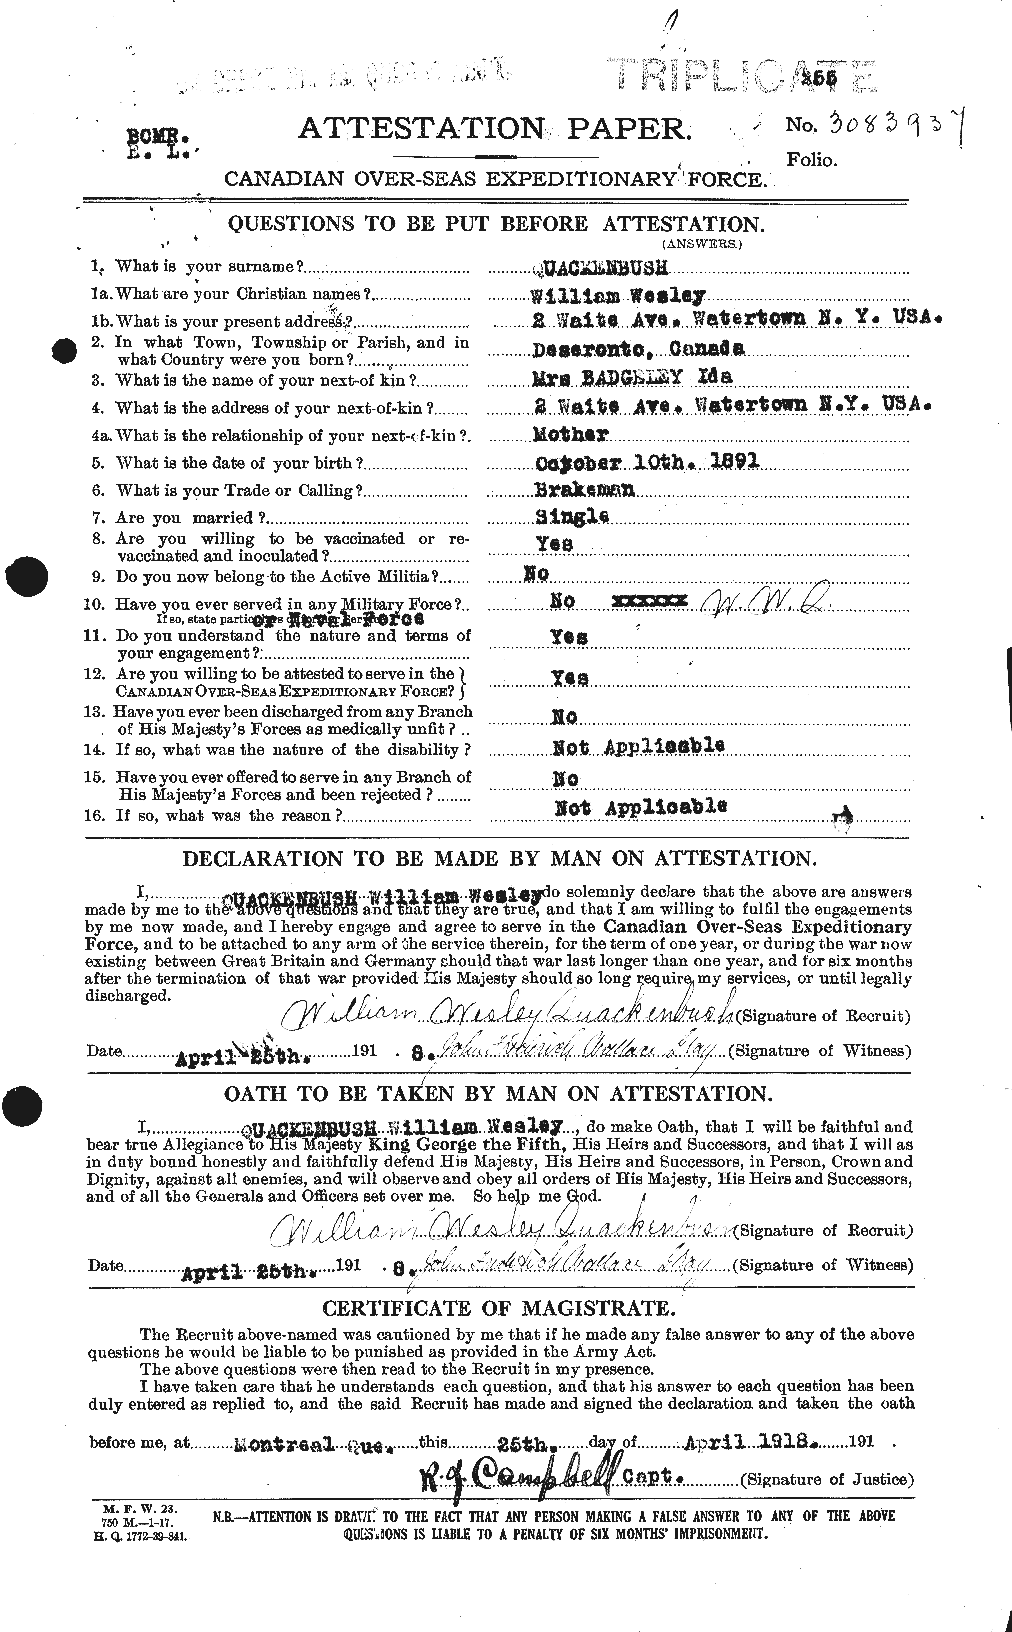 Personnel Records of the First World War - CEF 592642a